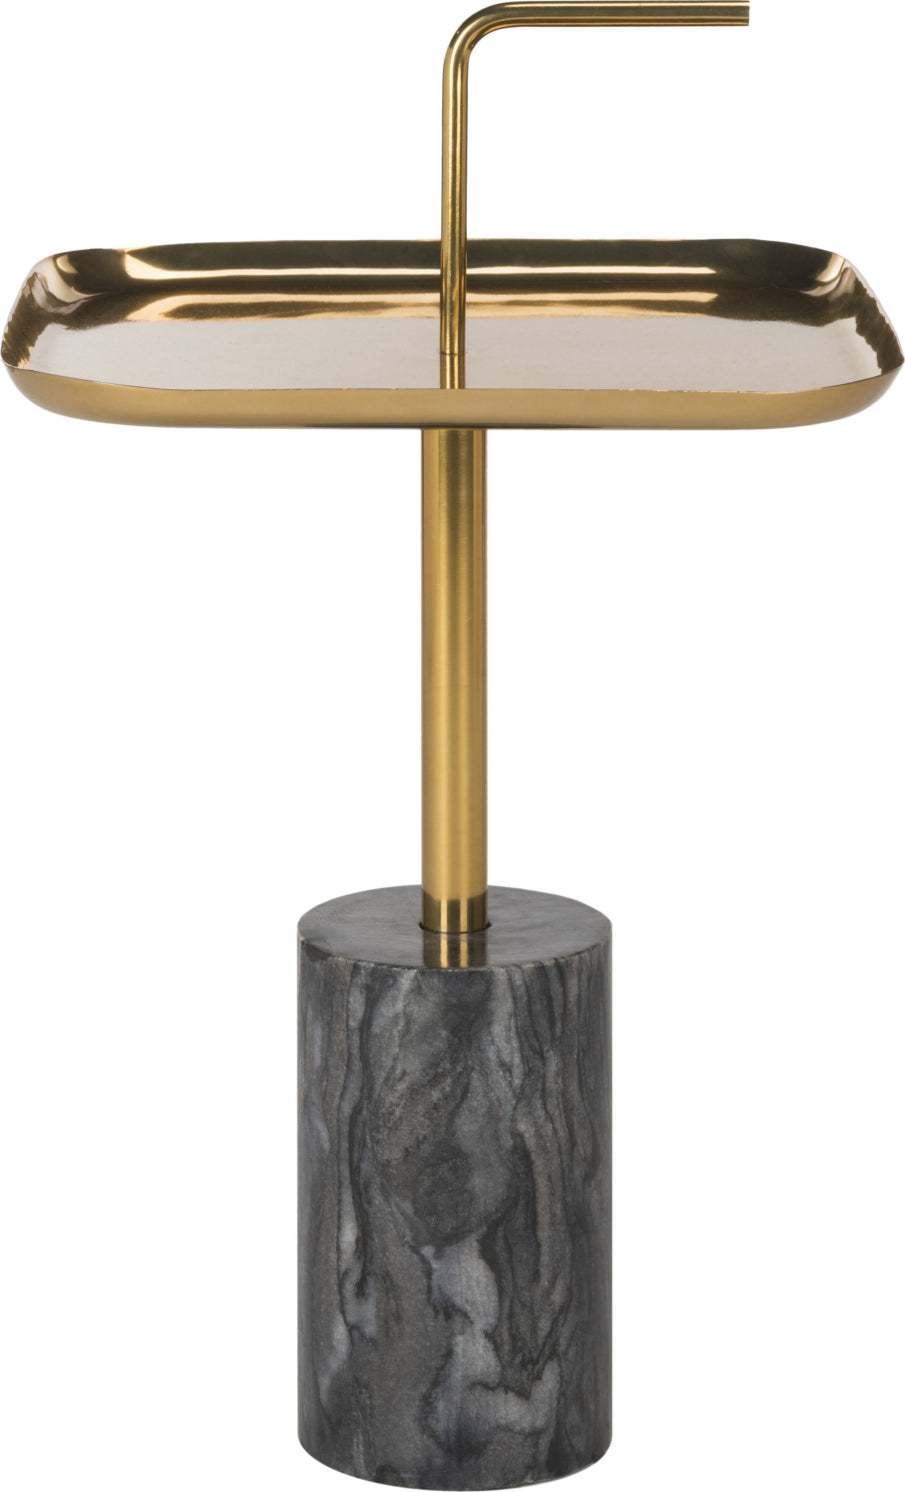 Safavieh Artemis Square Brass Top Side Table and Marble Furniture main image